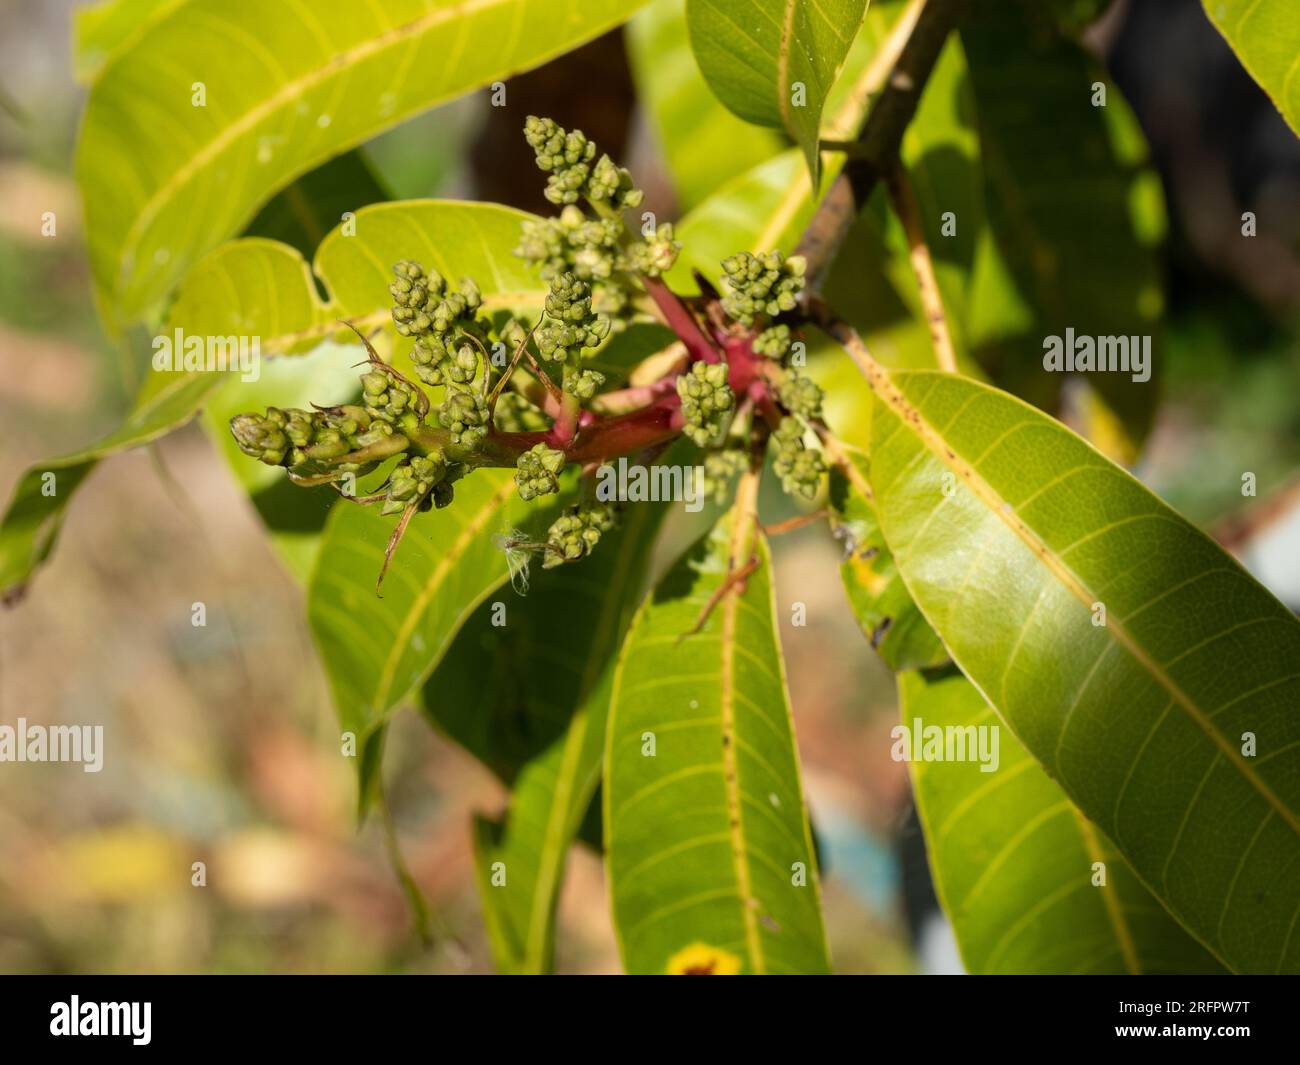 https://c8.alamy.com/comp/2RFPW7T/green-mango-flower-buds-on-pink-stems-surrounded-by-leaves-on-the-tree-2RFPW7T.jpg